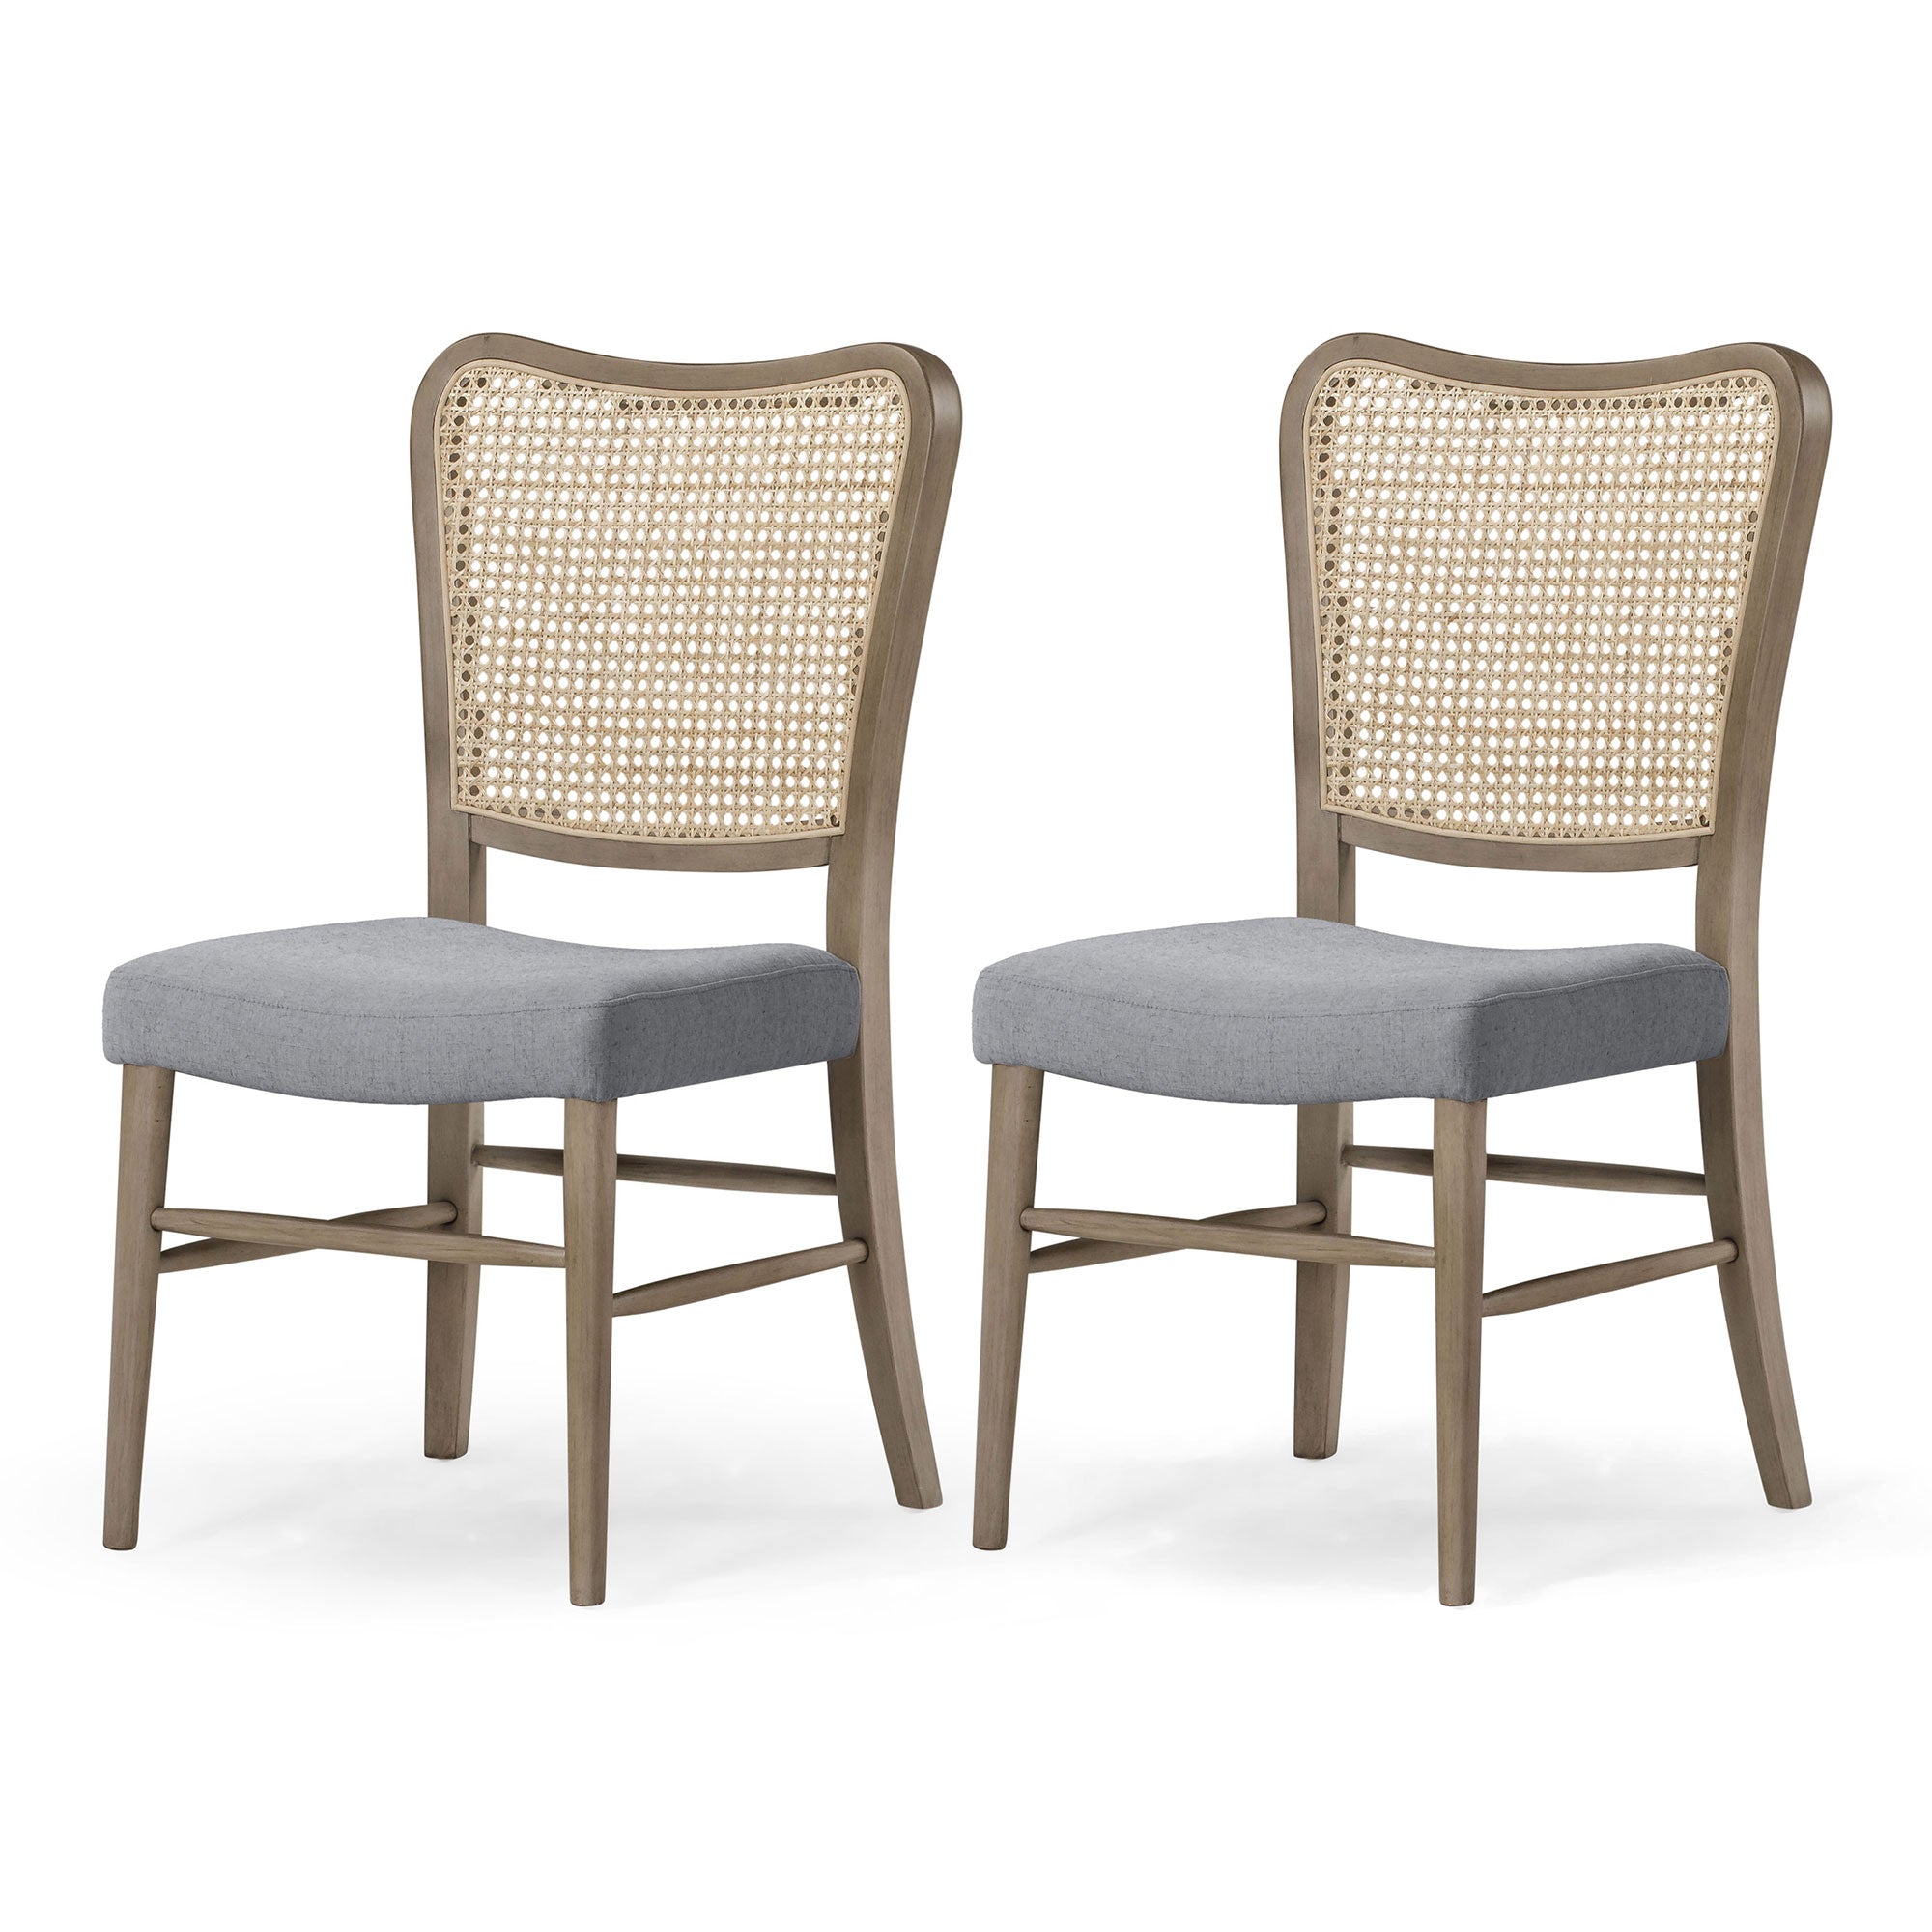 Maven-Lane-Vera-Wooden-Dining-Chair,-Antique-Grey-&-Slate-Linen-Fabric,-Set-of-2-Kitchen-&-Dining-Room-Chairs